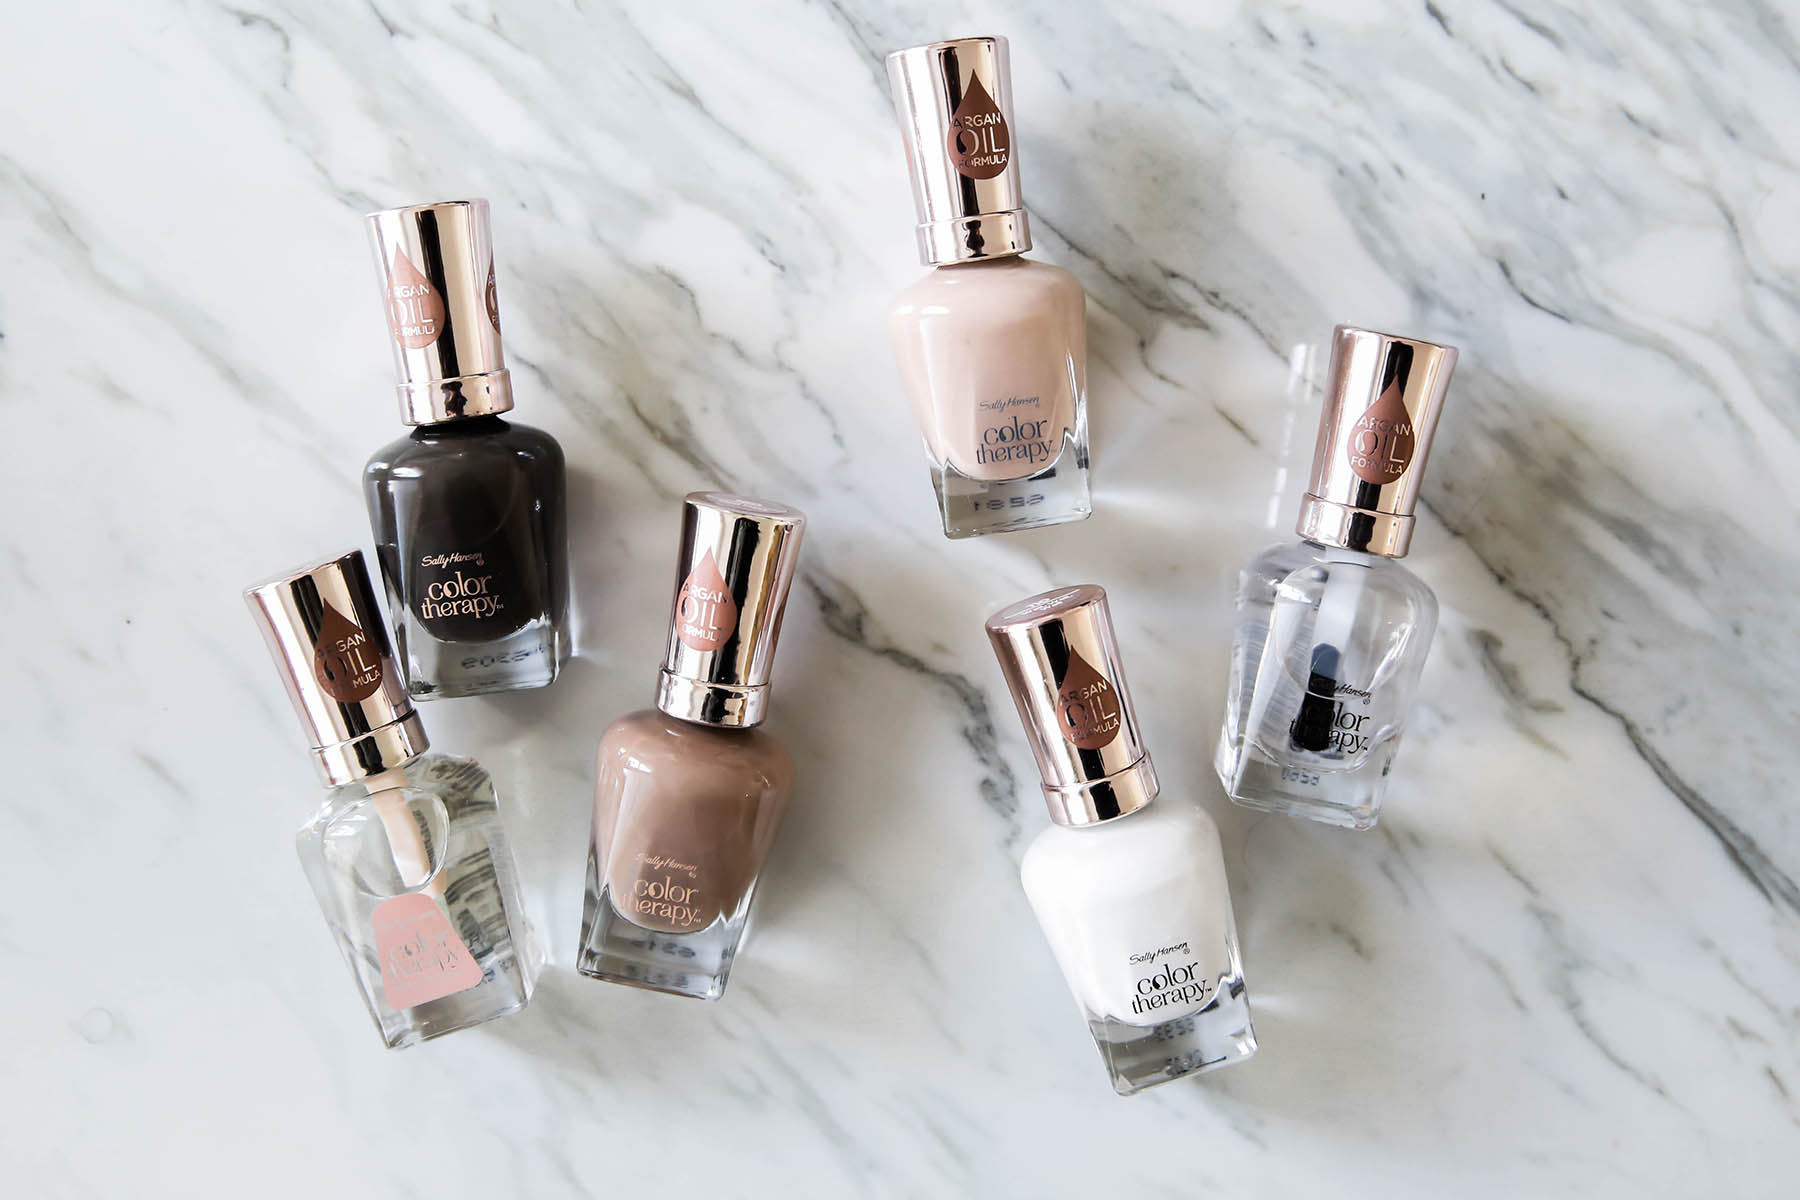 sally hansen color therapy nude nail colors